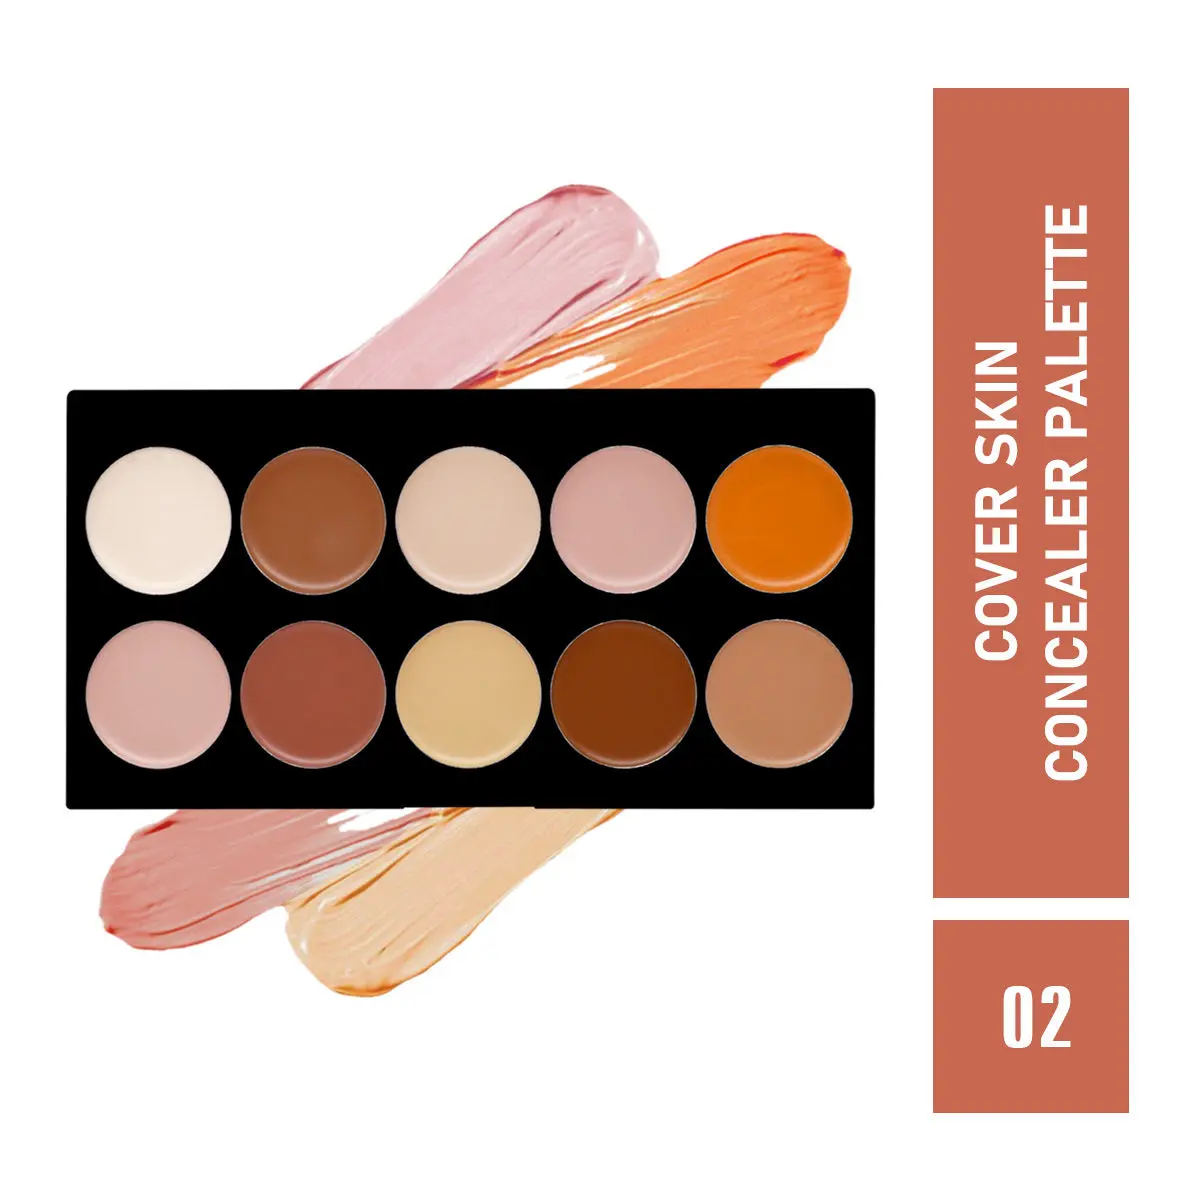 Mattlook Cover Skin Concealer Palette Full Coverage Colour Correcting Lightweight Long-lasting Waterproof Creamy Formula - 02 (18g)